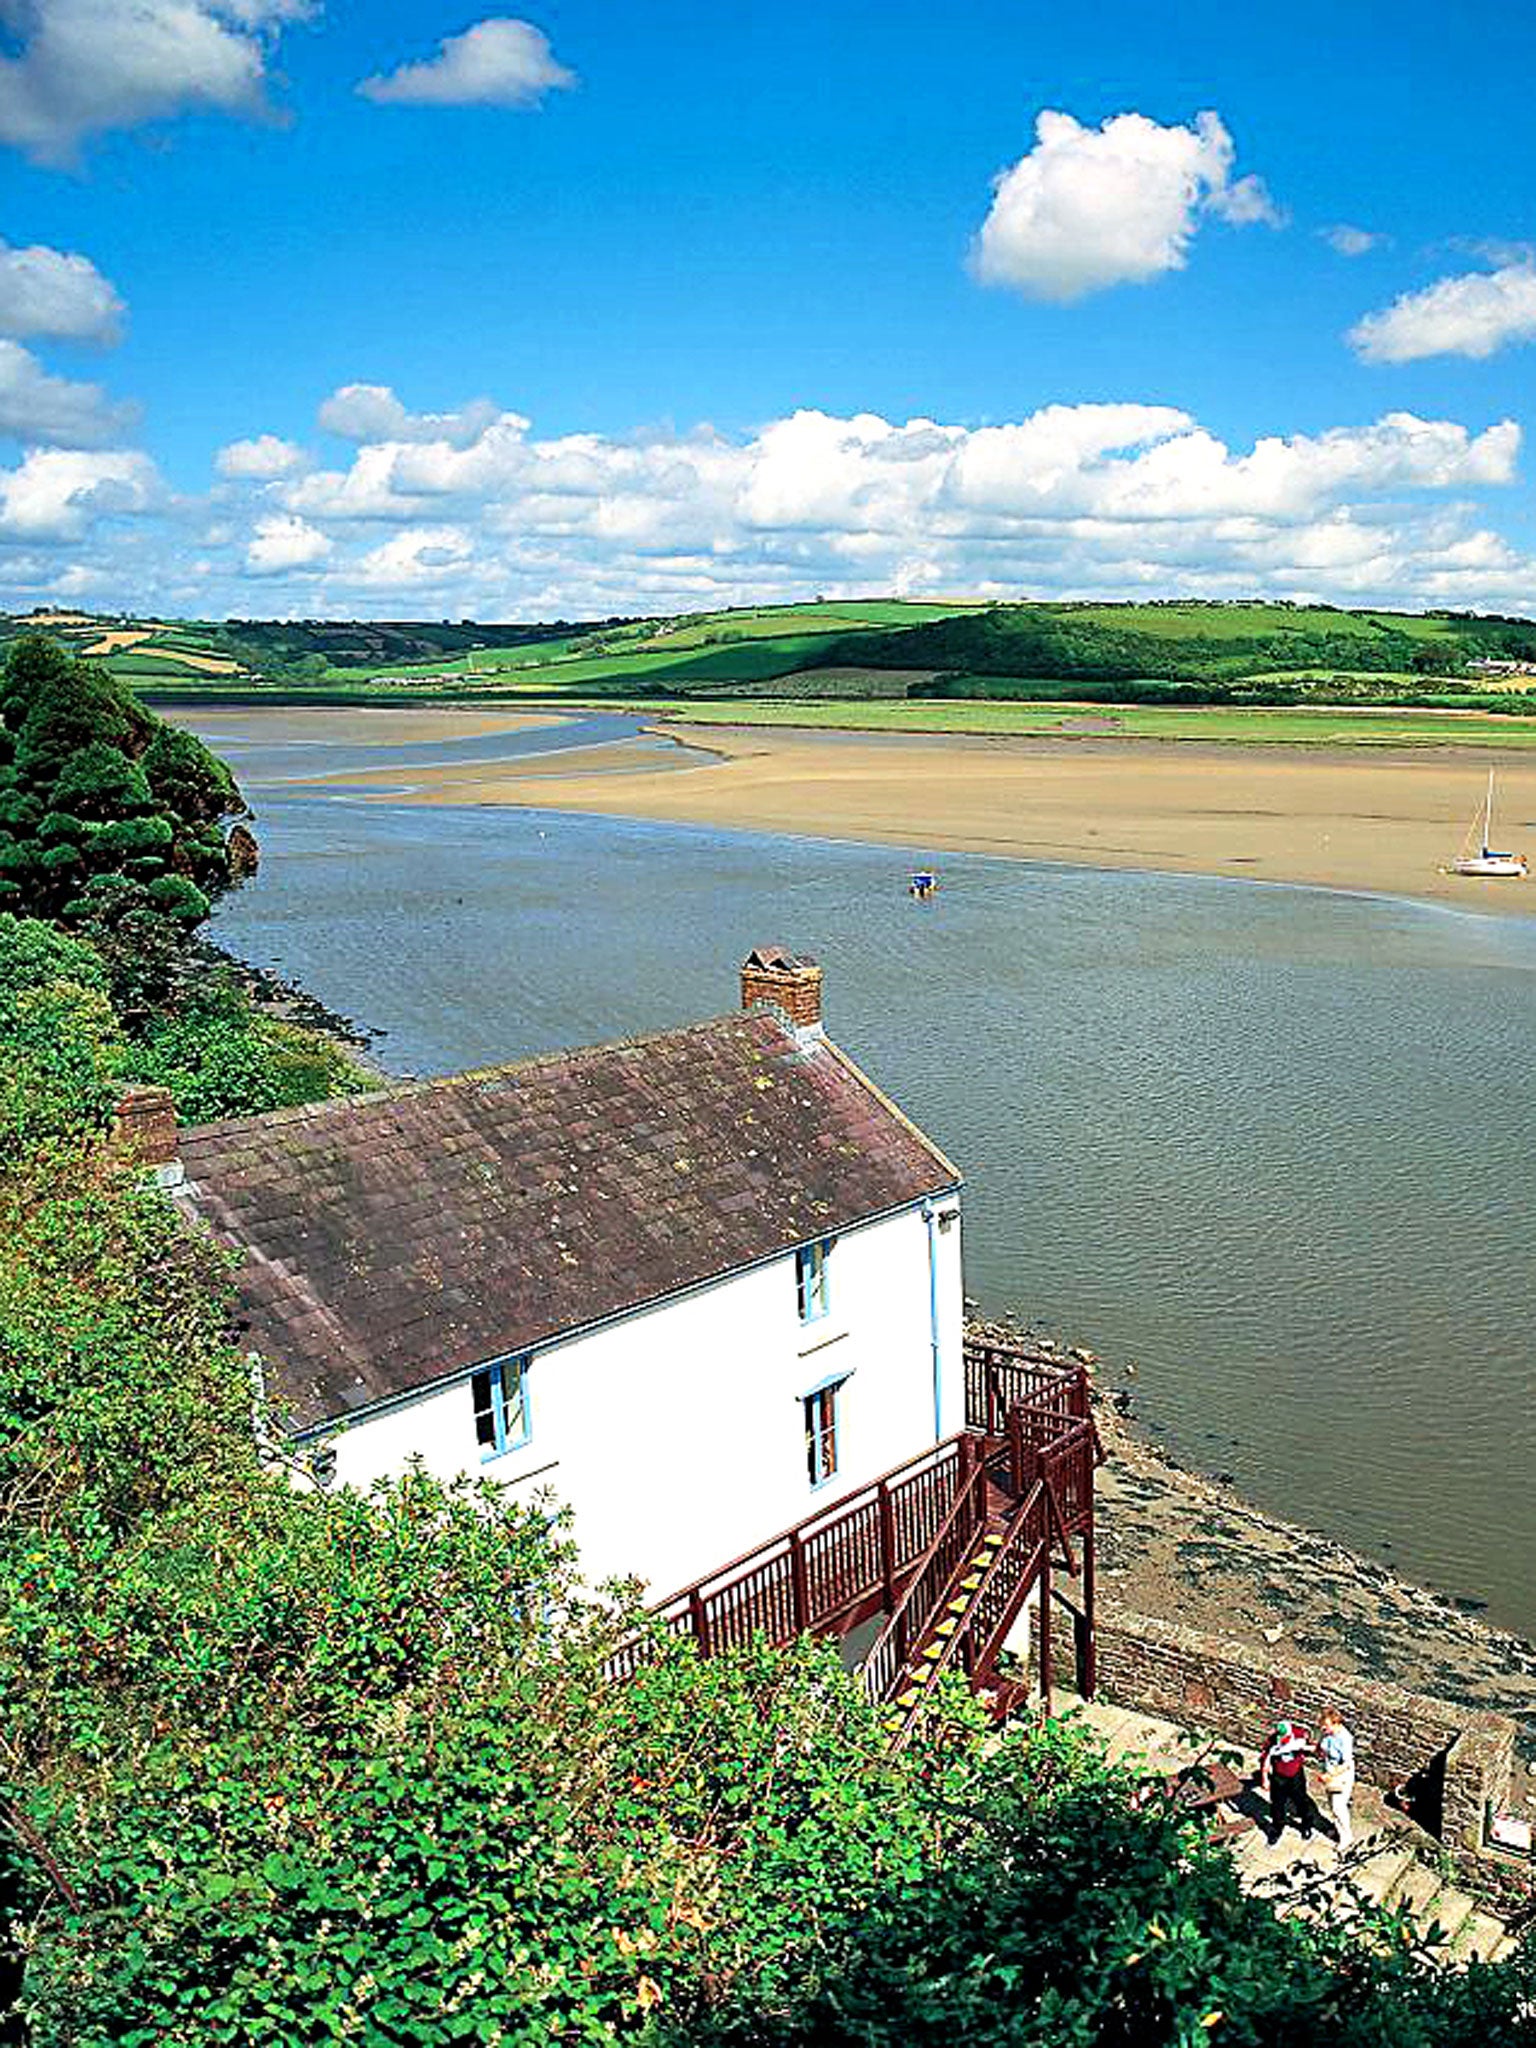 The Laugharne boat house where Dylan Thomas lived and worked in the final years of his life, looking out over the estuary and the trees beyond, which is said to be the inspiration for Under Milk Wood.